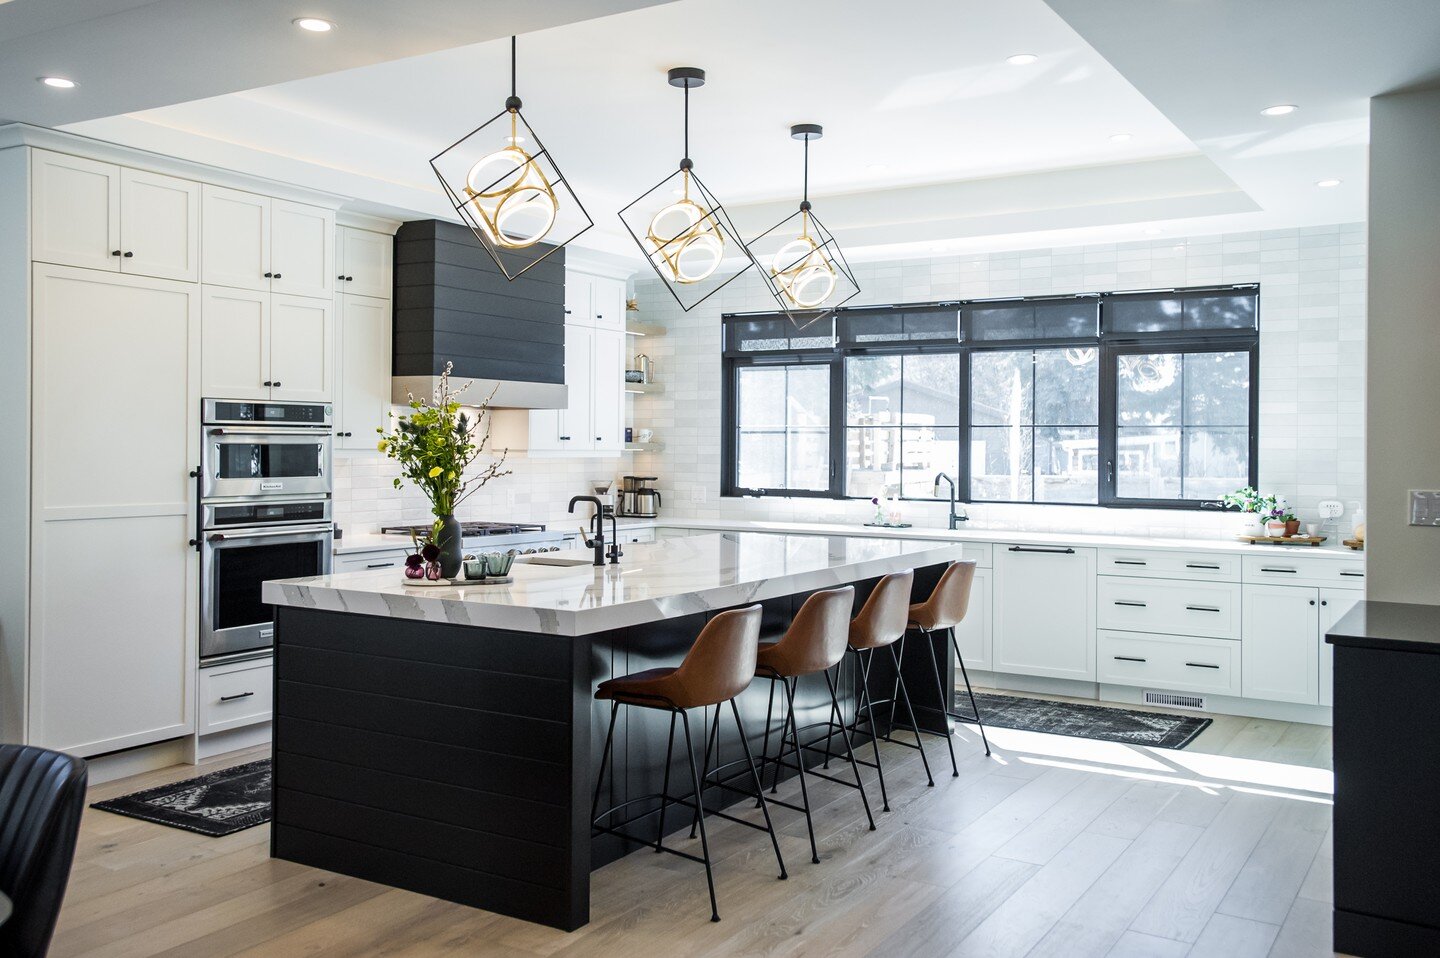 Hope you all had a refreshing long weekend! 🌷
-
#yegdesign #yeghomes #dreamhome #dreamkitchen #kitchendesign #yeg #yeghomes #loveit #kitchenrenovation #yegrenovation #yegreno #yegkitchen #wow #kitchenisland #cabinetdesign